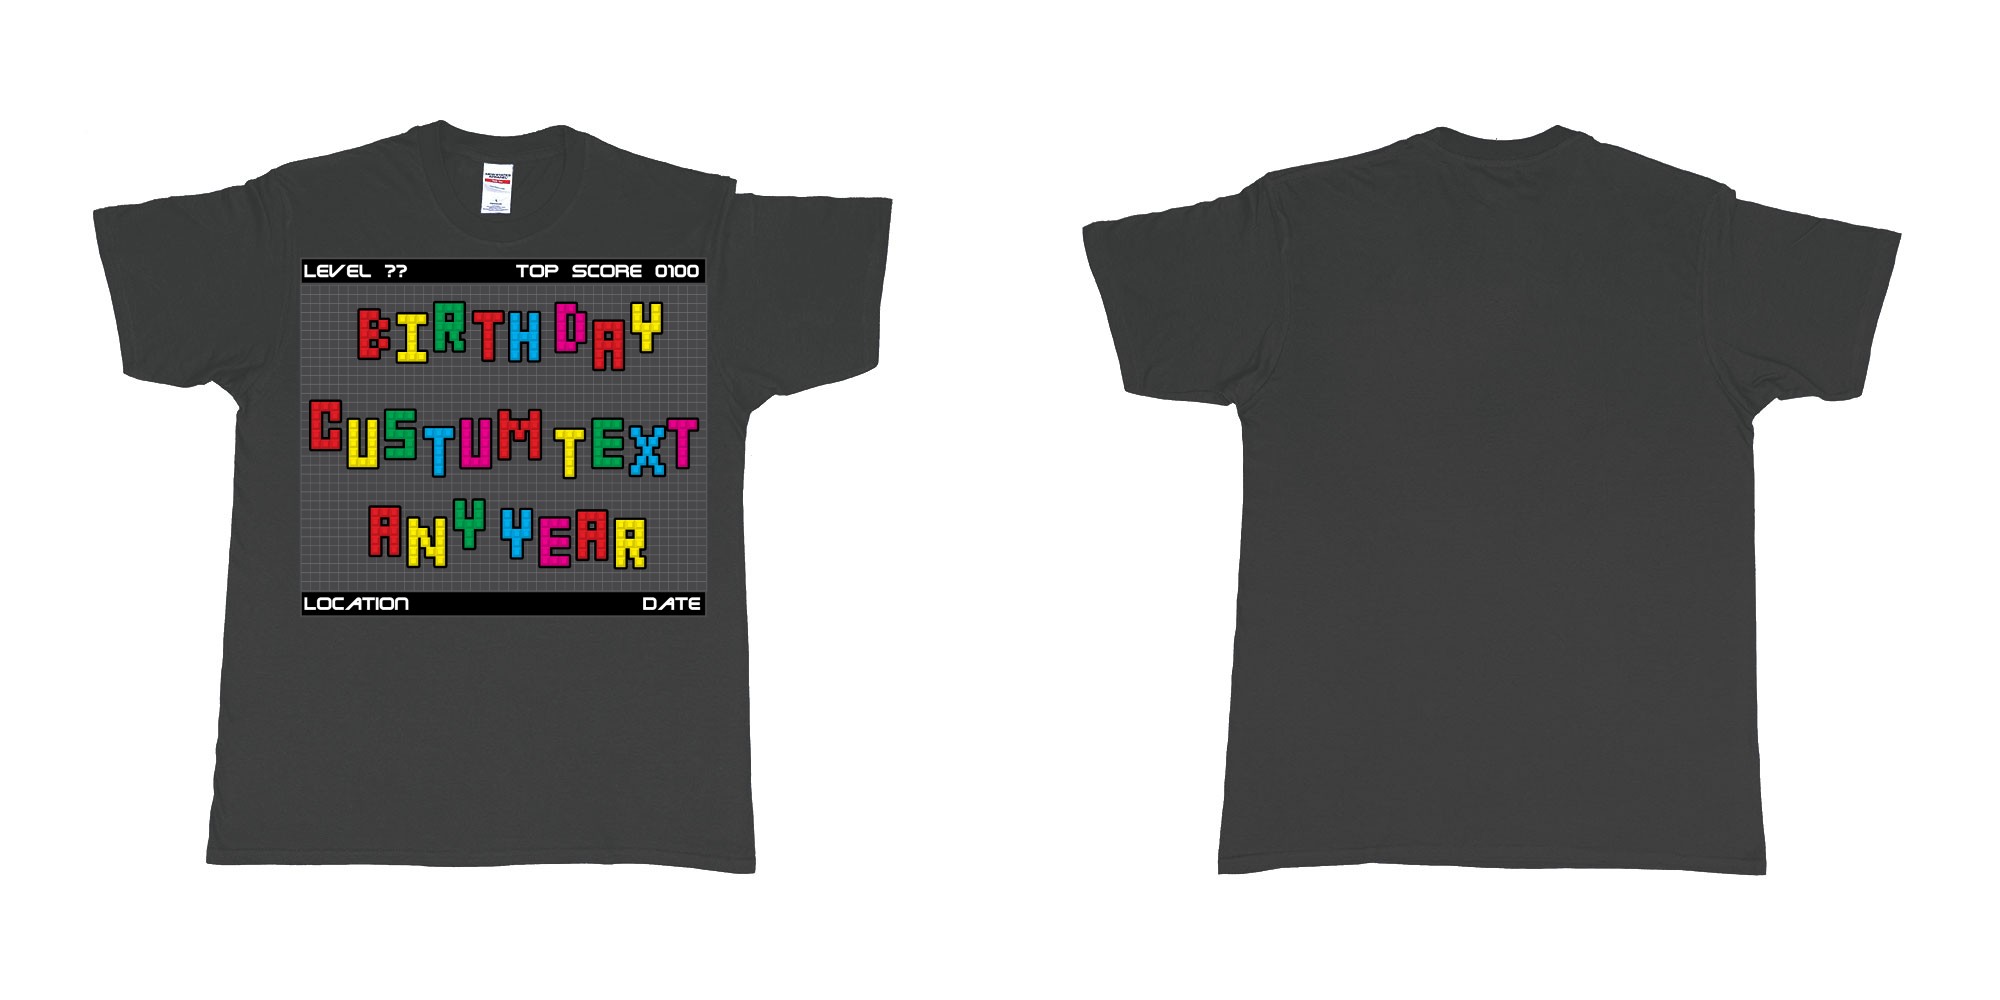 Custom tshirt design tetris block custom text birthday in fabric color black choice your own text made in Bali by The Pirate Way